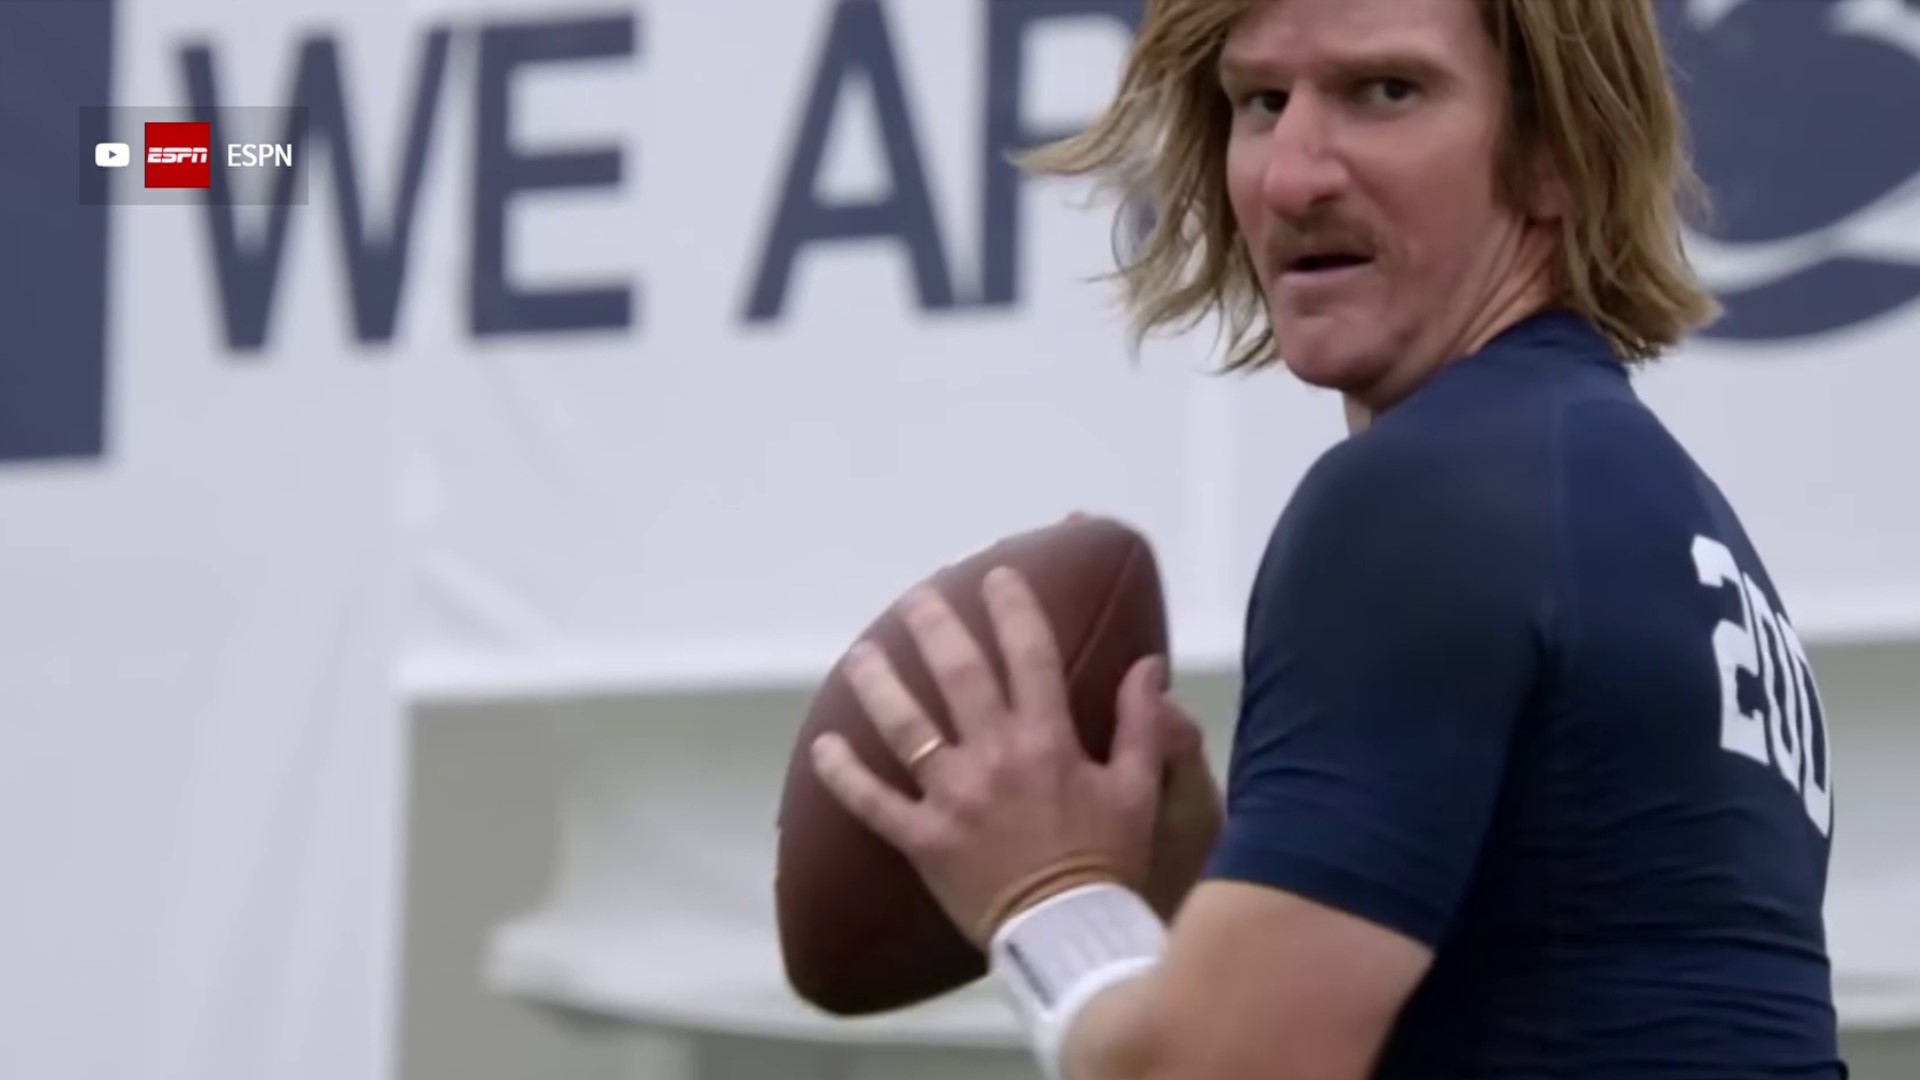 Former New York Giants QB Eli Manning is going viral for going undercover at Penn State.